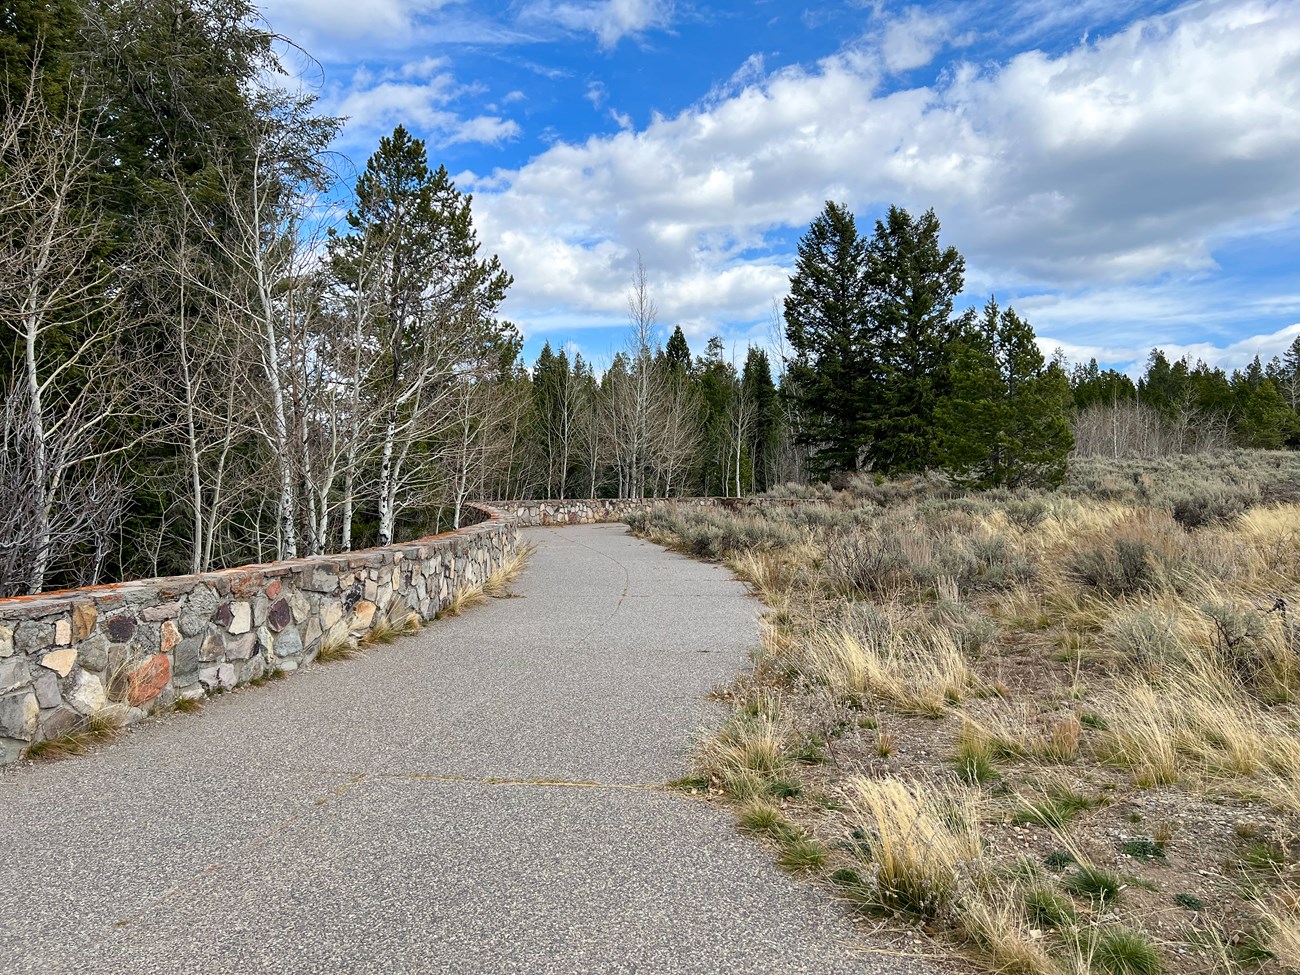 Pathway at Snake River Overlook with trees in background